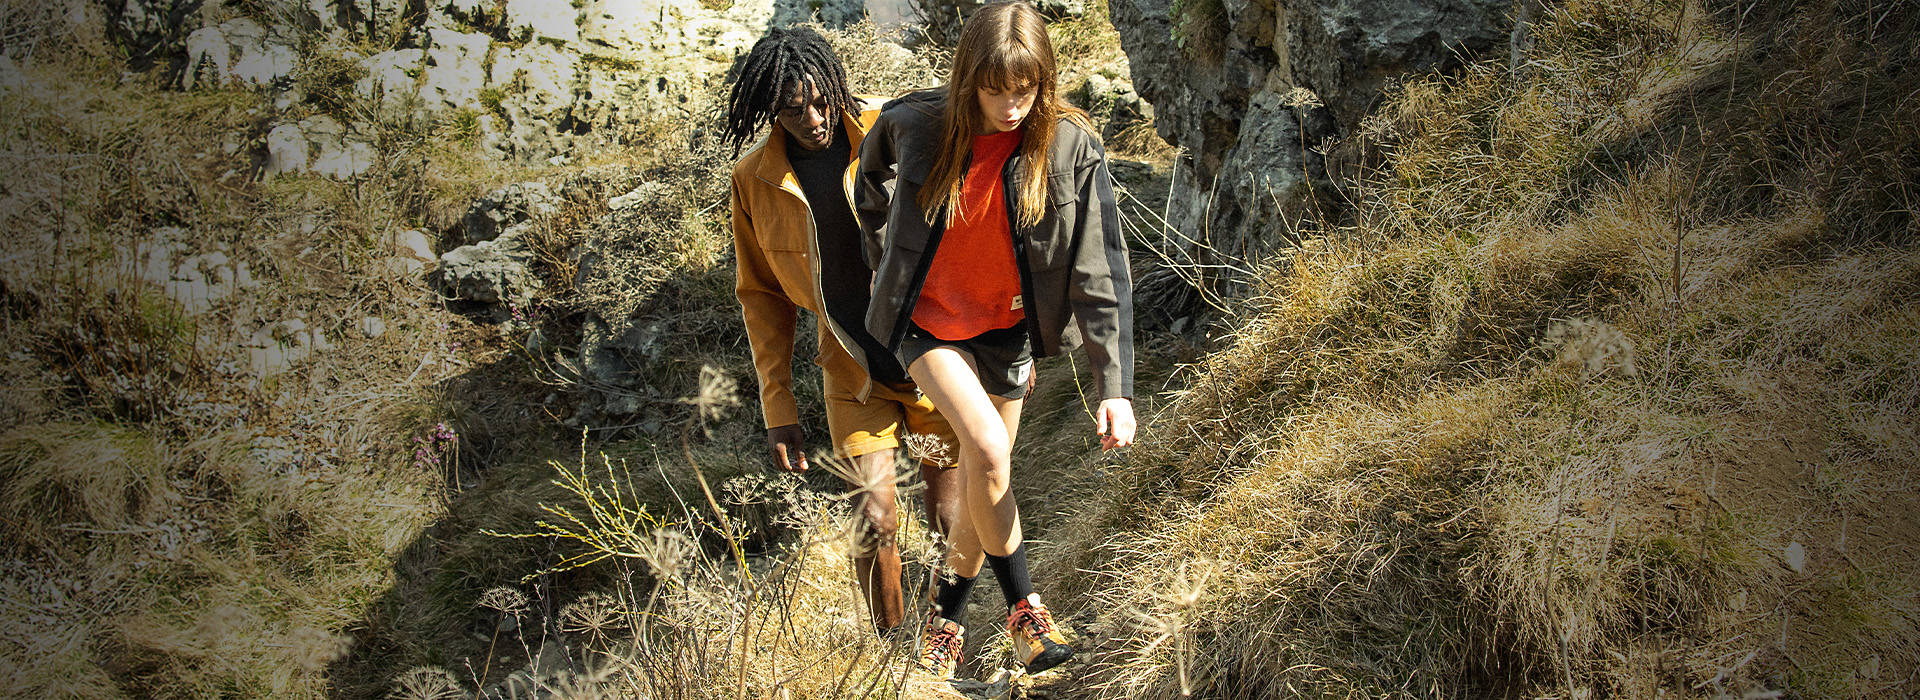 Image of two friends hiking toward the camera along a rocky mountain trail, wearing Icebreaker x Timberland brand wool jackets and chino shorts. The woman at front has long brown hair with bangs and an orange shirt; the man behind her has braids and is wearing a black shirt, and both are wearing hiking shoes.